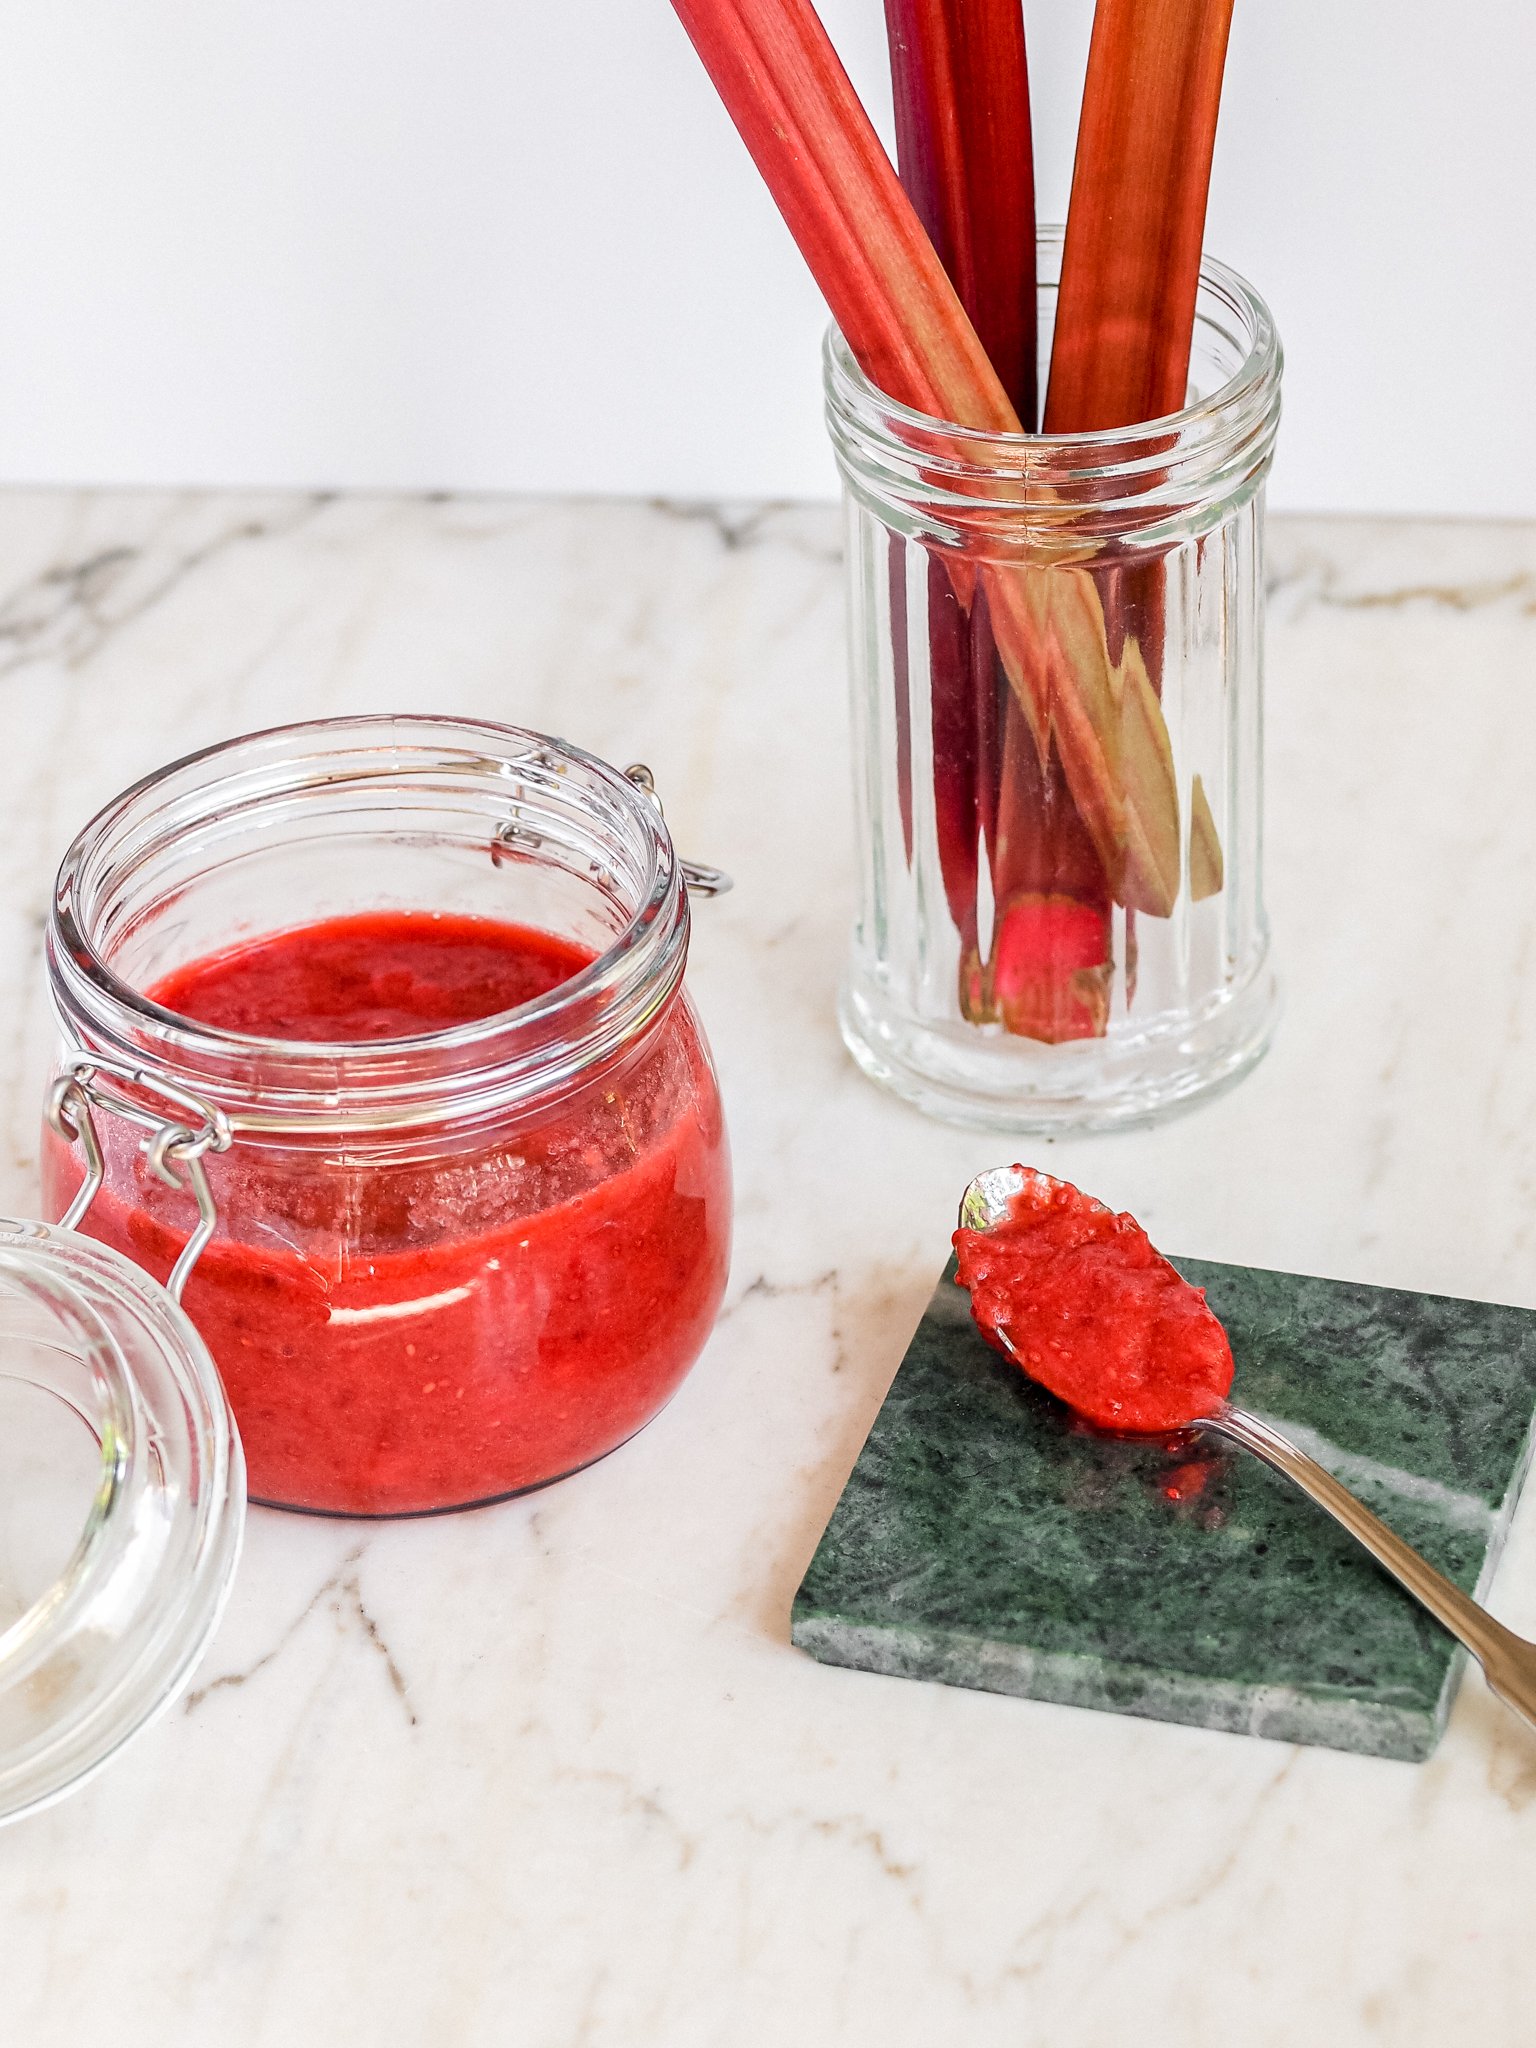 Healthy Strawberry Rhubarb Compote (Vegan and Refined Sugar Free)